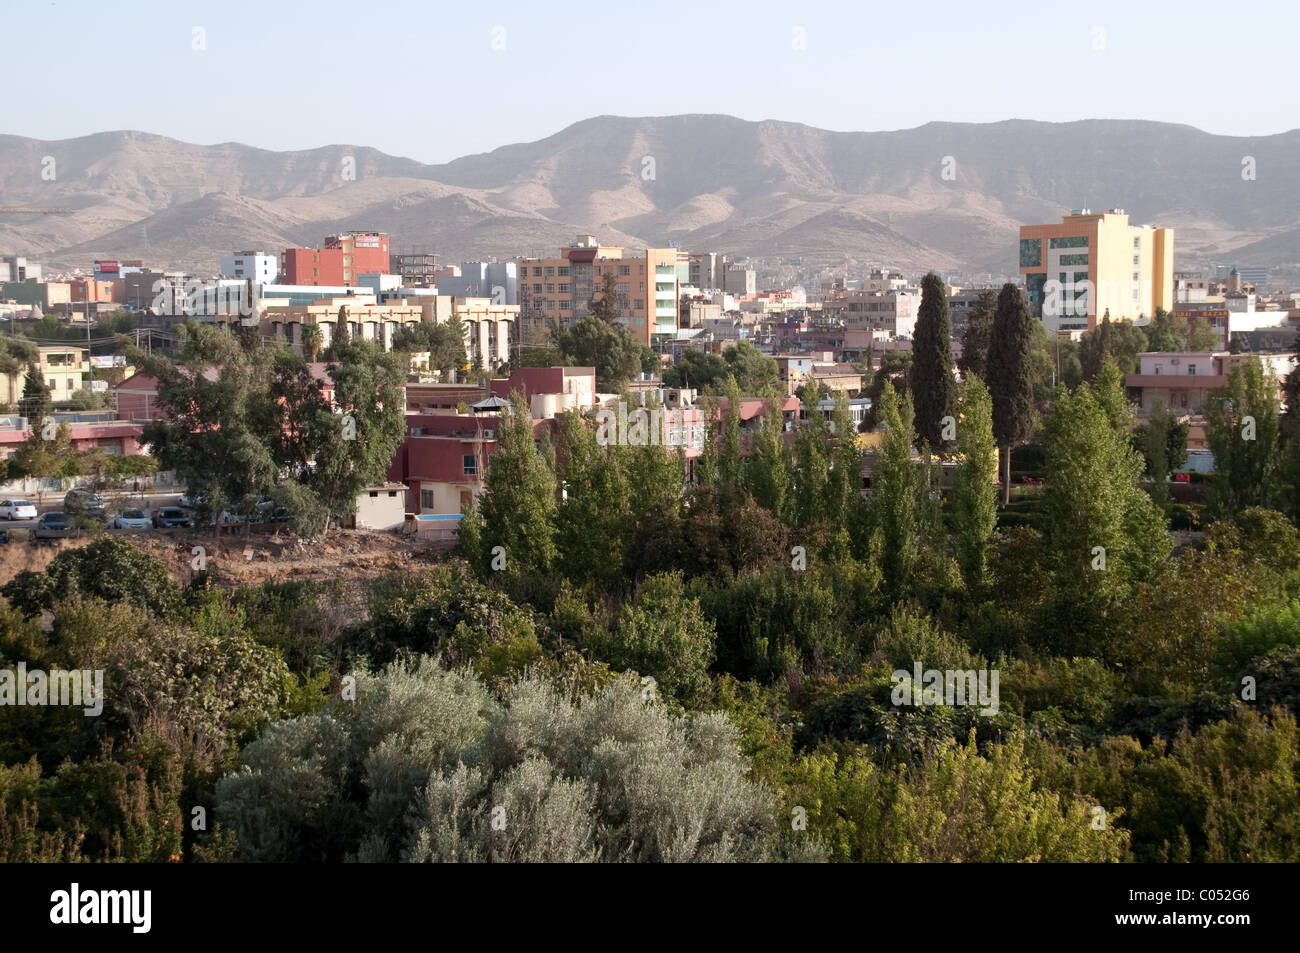 Houses and apartment buildings in a residential neighbourhood in the Kurdish city of Duhok (Dohuk) in the Kurdistan Autonomous Region, Northern Iraq. Stock Photo